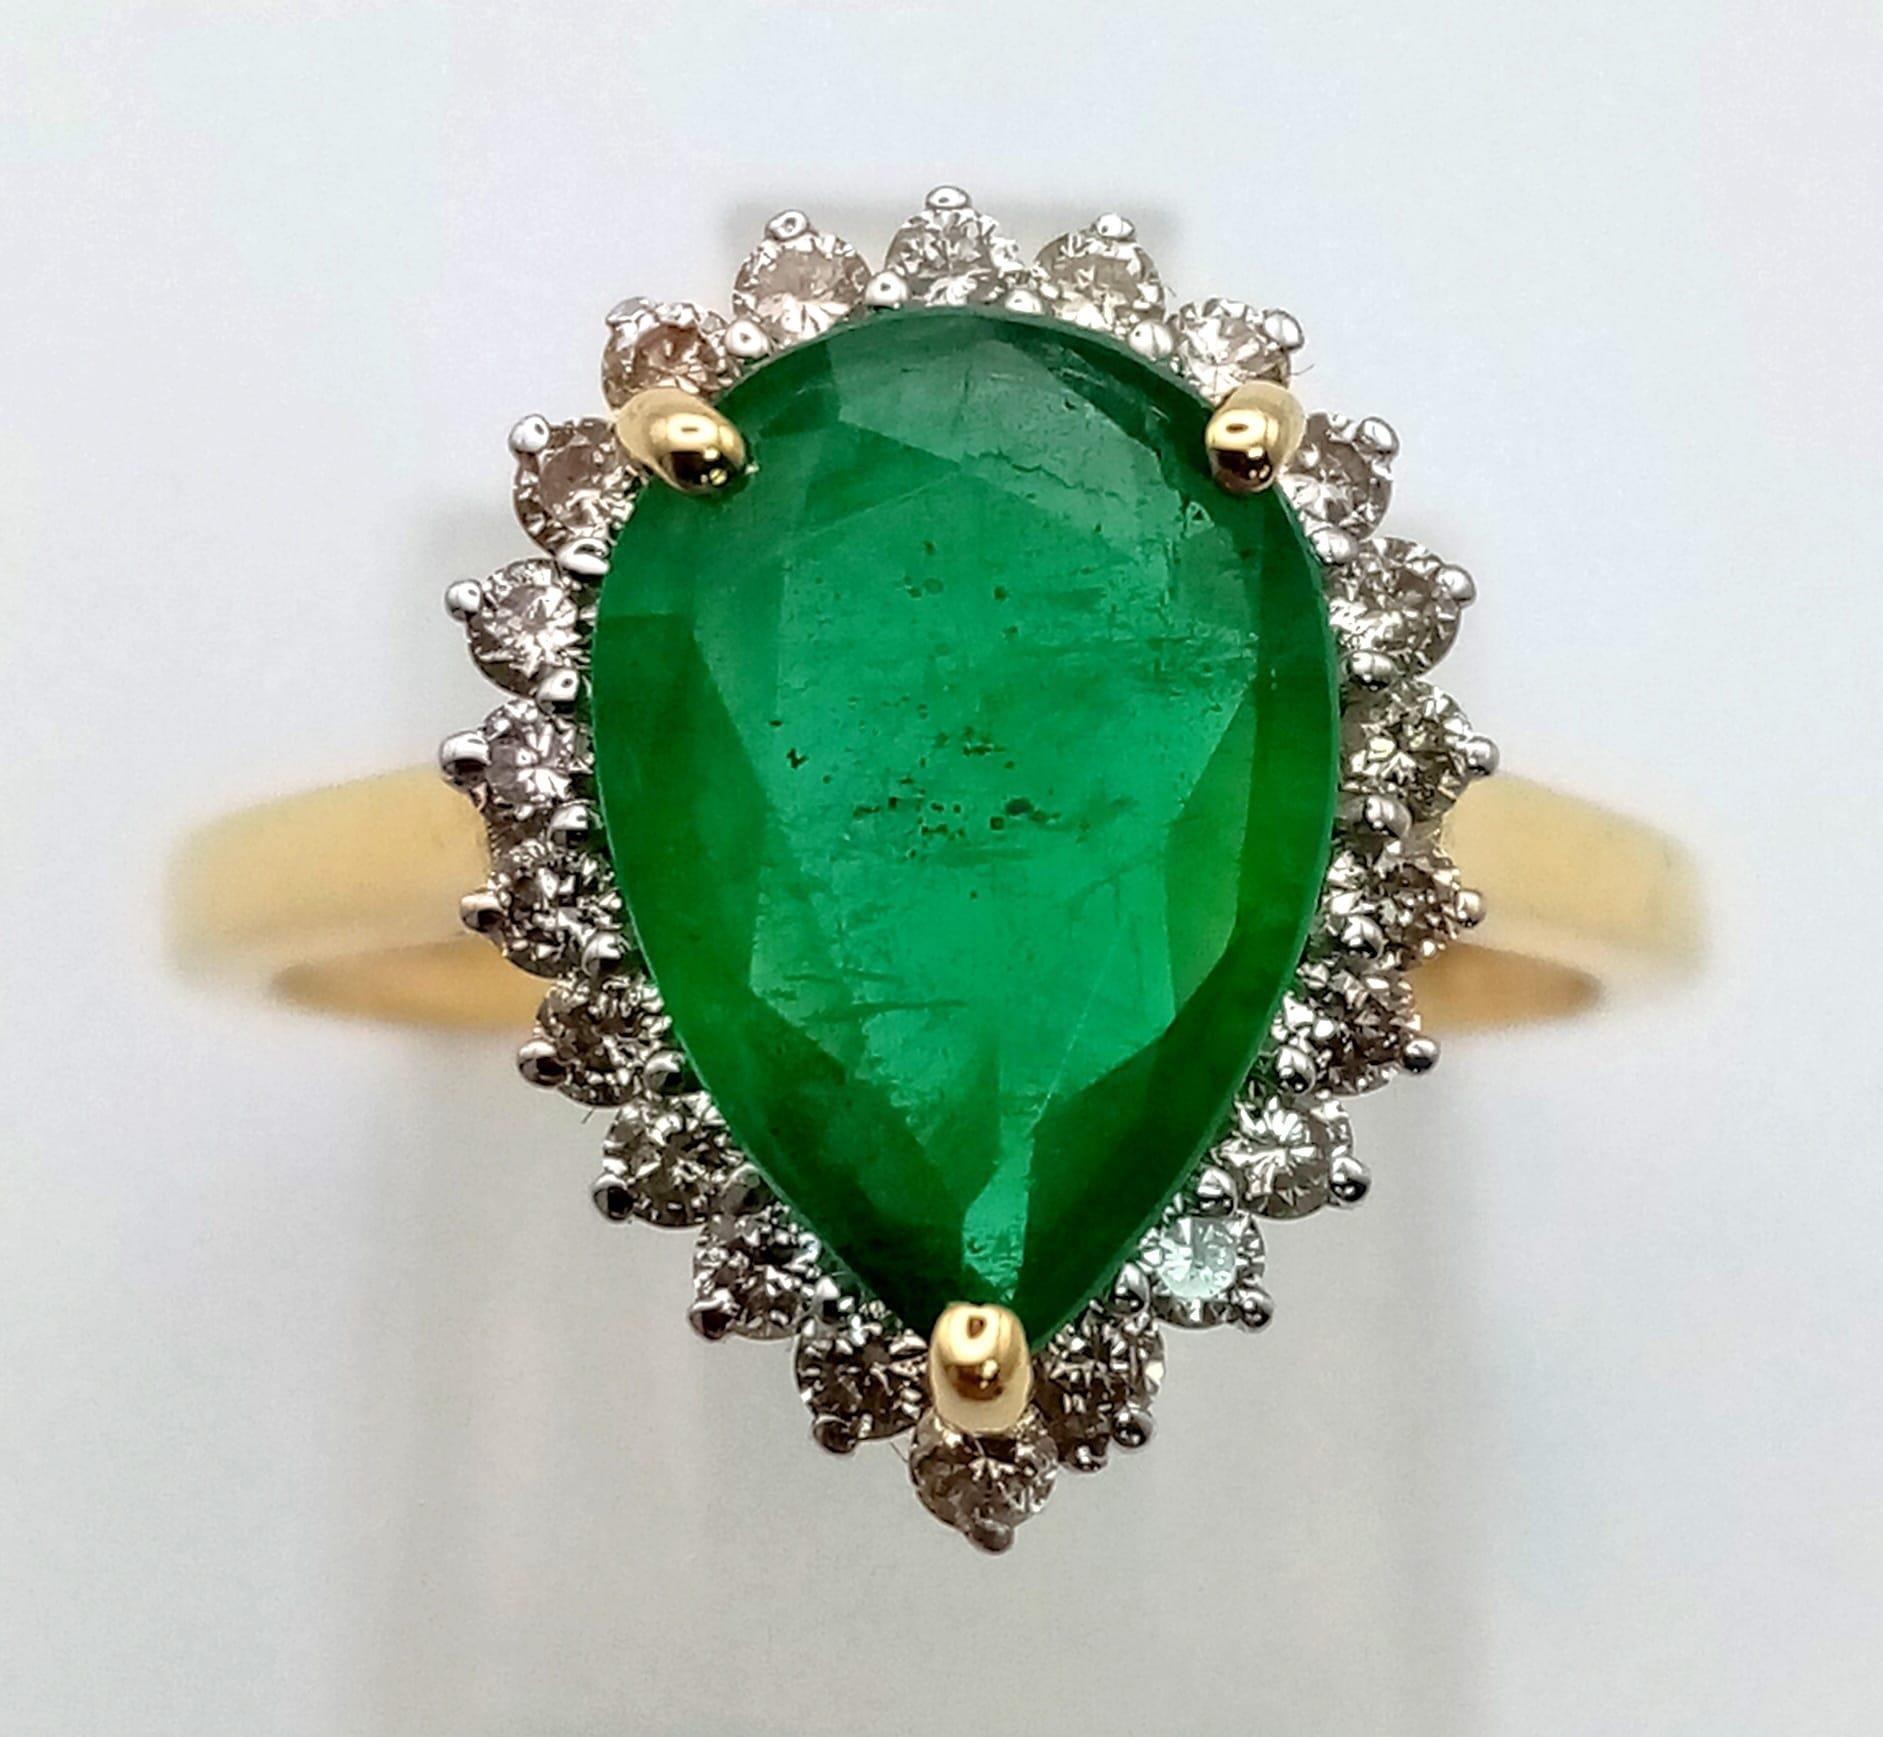 A 14K Yellow Gold 2.10ct Zambian Emerald with Diamond Surround (0.40ct) Ring. Size N/O. 2.9g total